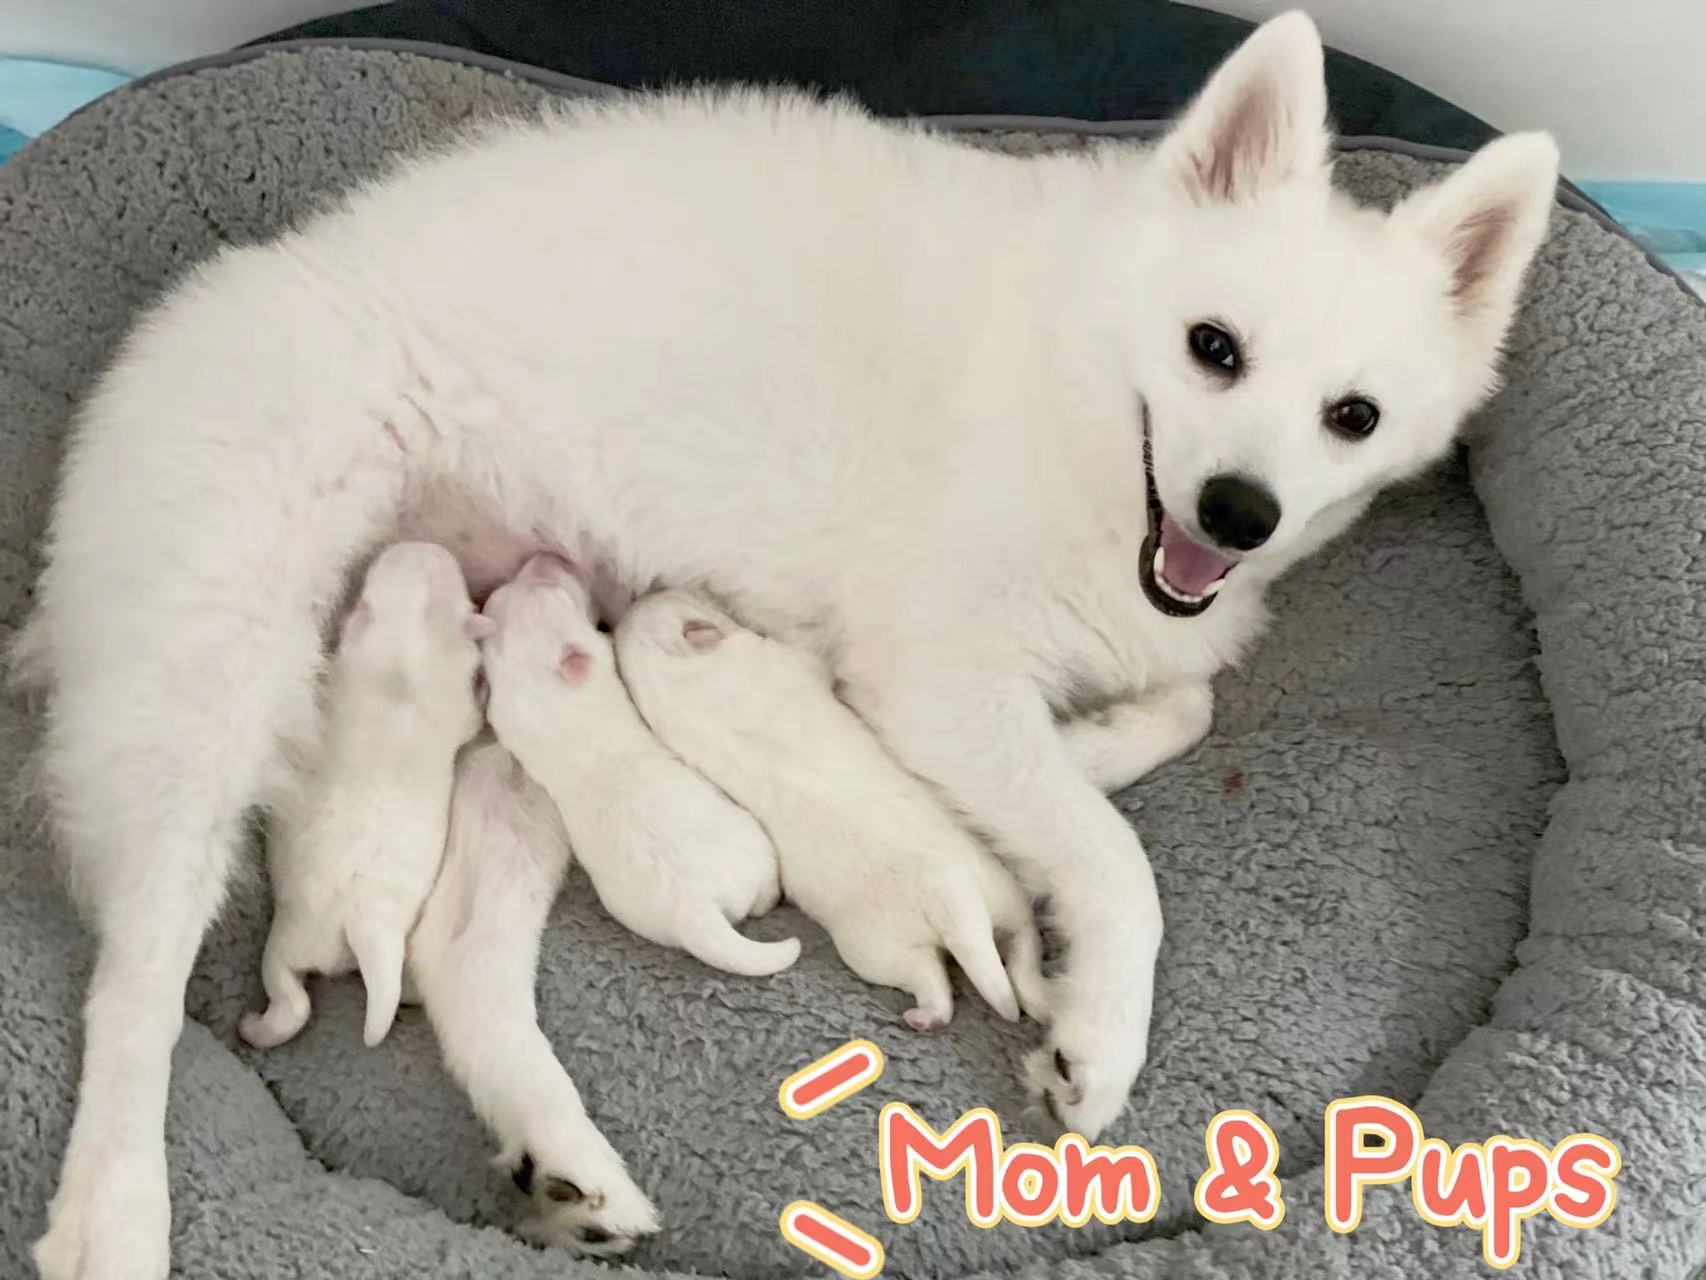 Loveable purebred Japanese Spitz puppies